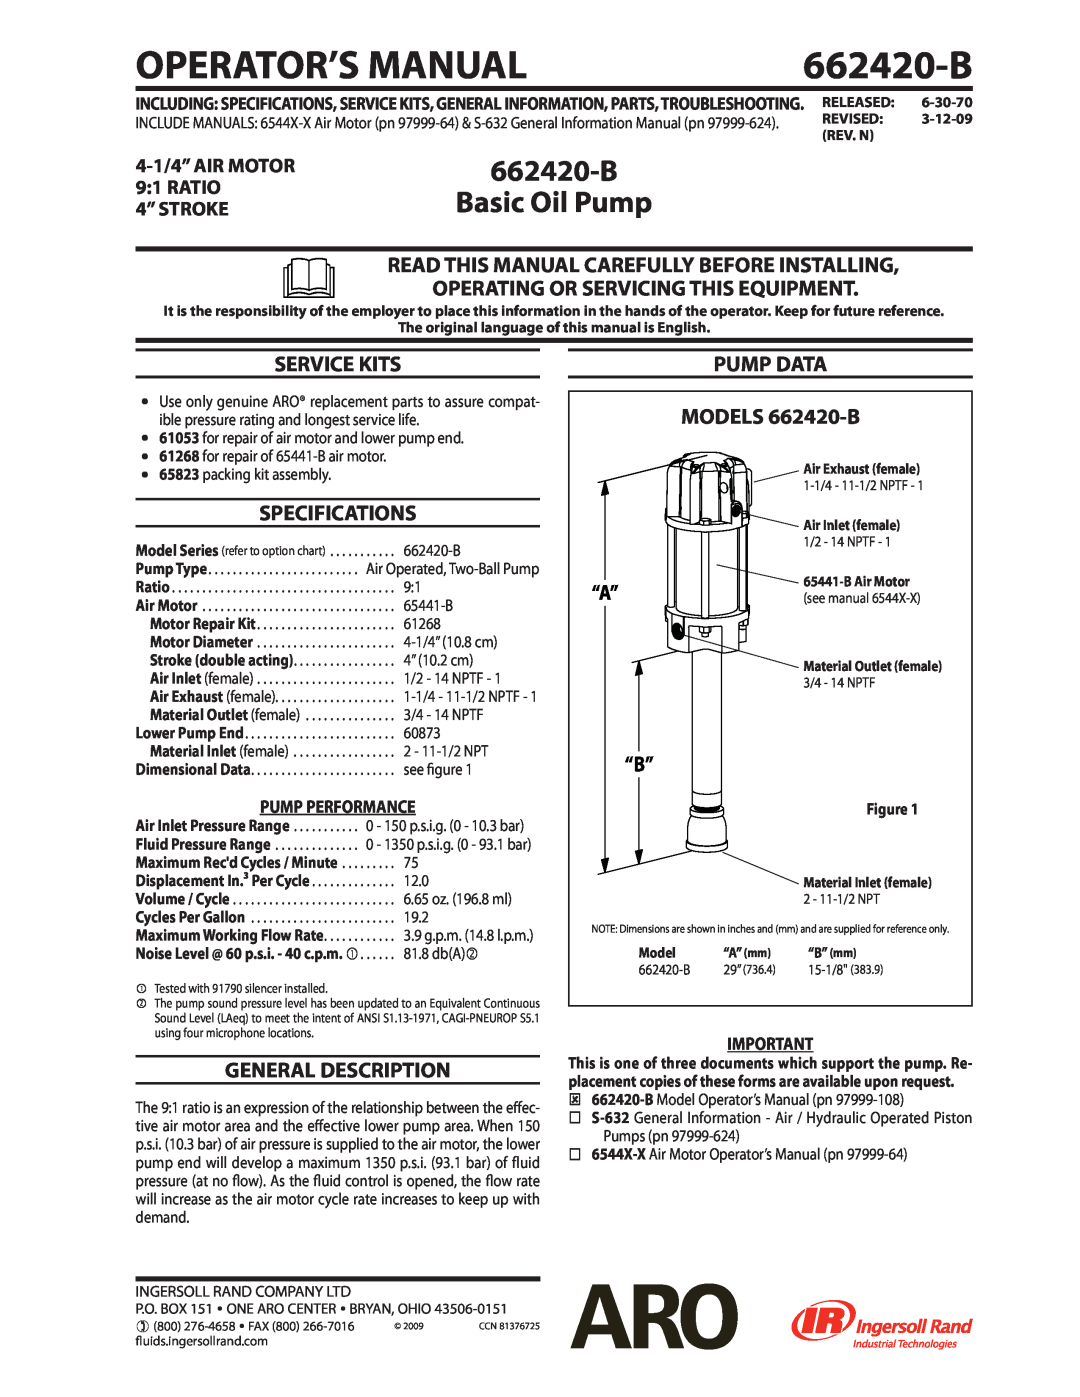 Ingersoll-Rand 662420-B specifications Read This Manual Carefully Before Installing, Operating Or Servicing This Equipment 